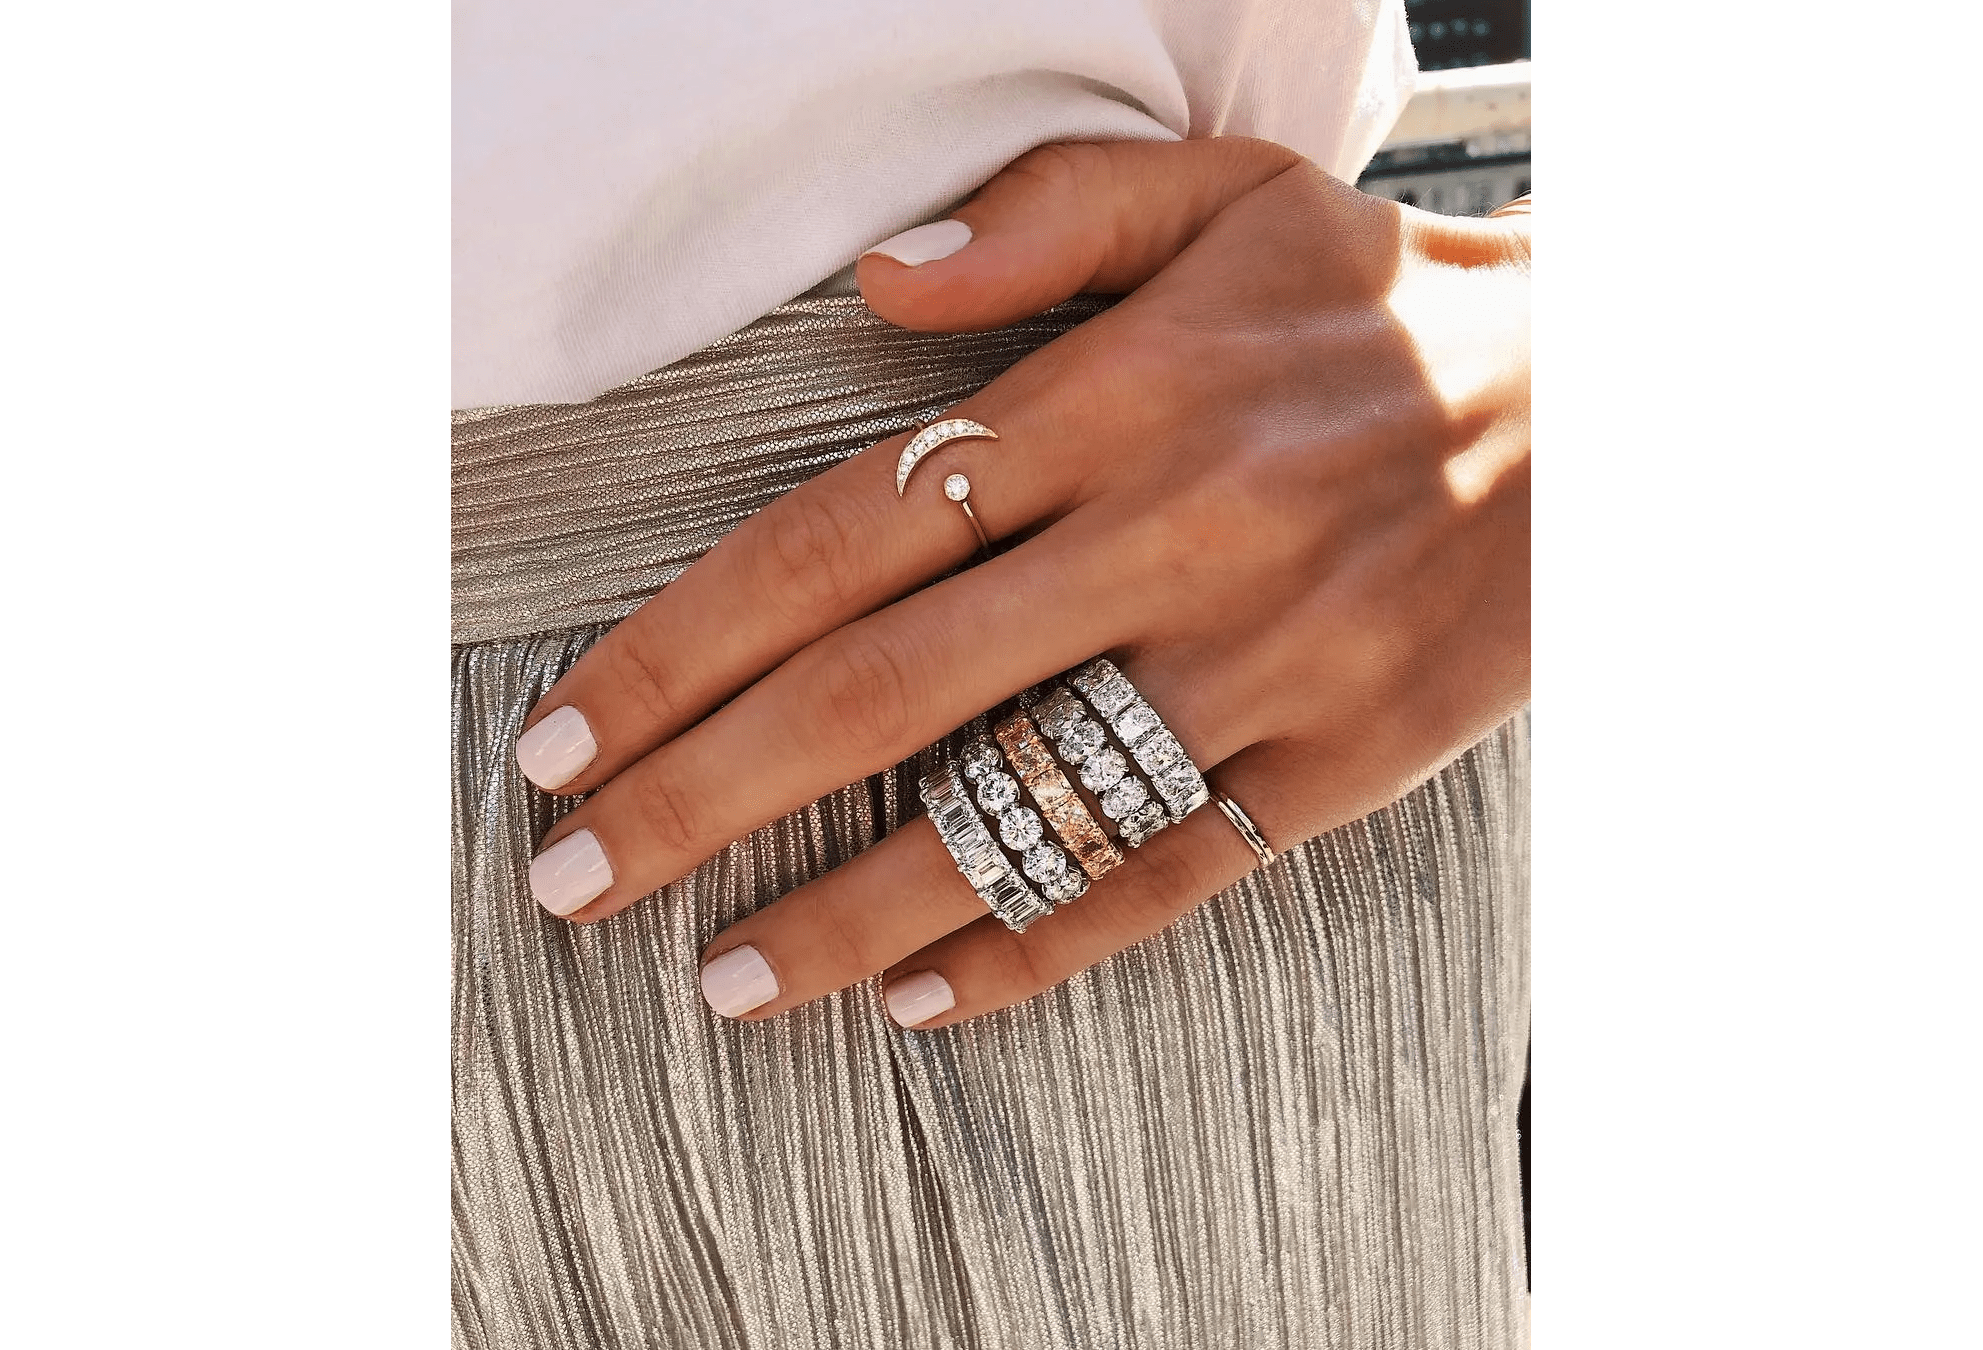 How to Choose an Engagement Ring Based on Your Lifestyle 64115 1 - How to Choose an Engagement Ring Based on Your Lifestyle